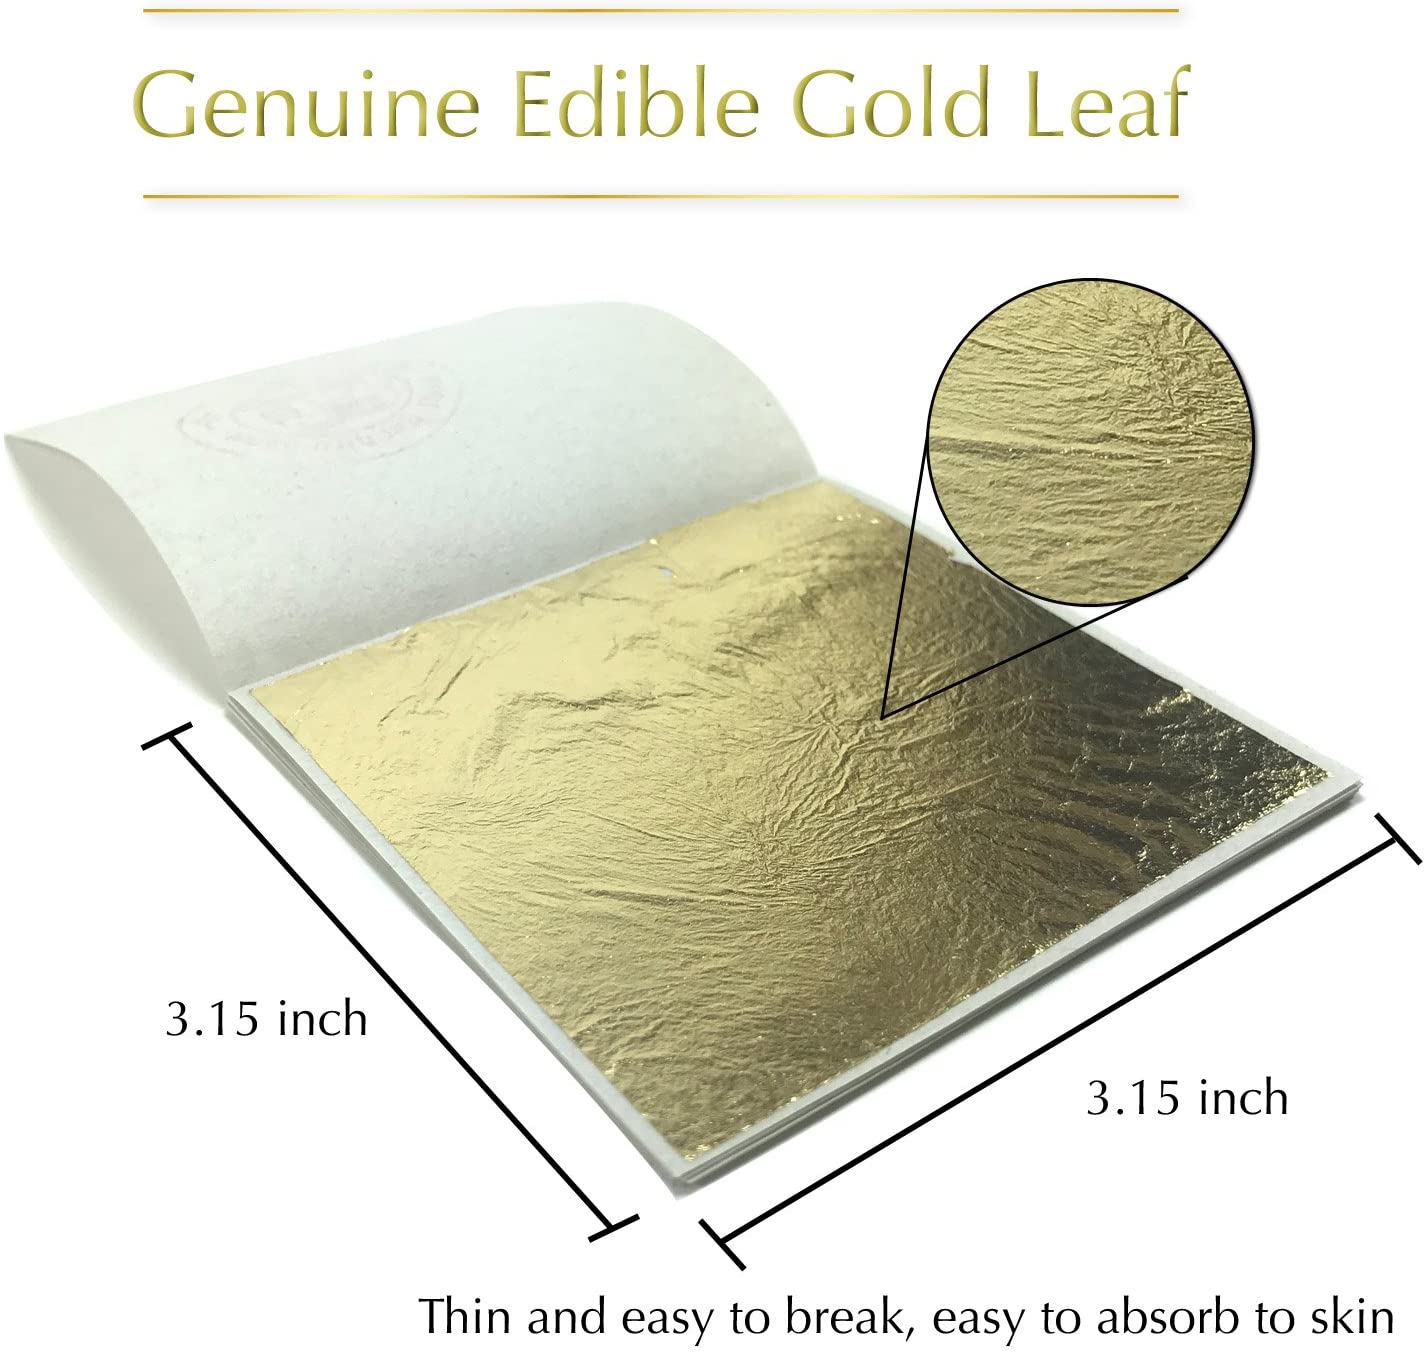 10 Sheets Gold Foil 10 Sheets per Pack 24K Genuine Edible Gold Leaf by KINGBOOM 3.15 inches per Sheet Loose Leaf for Cake and Coffee 